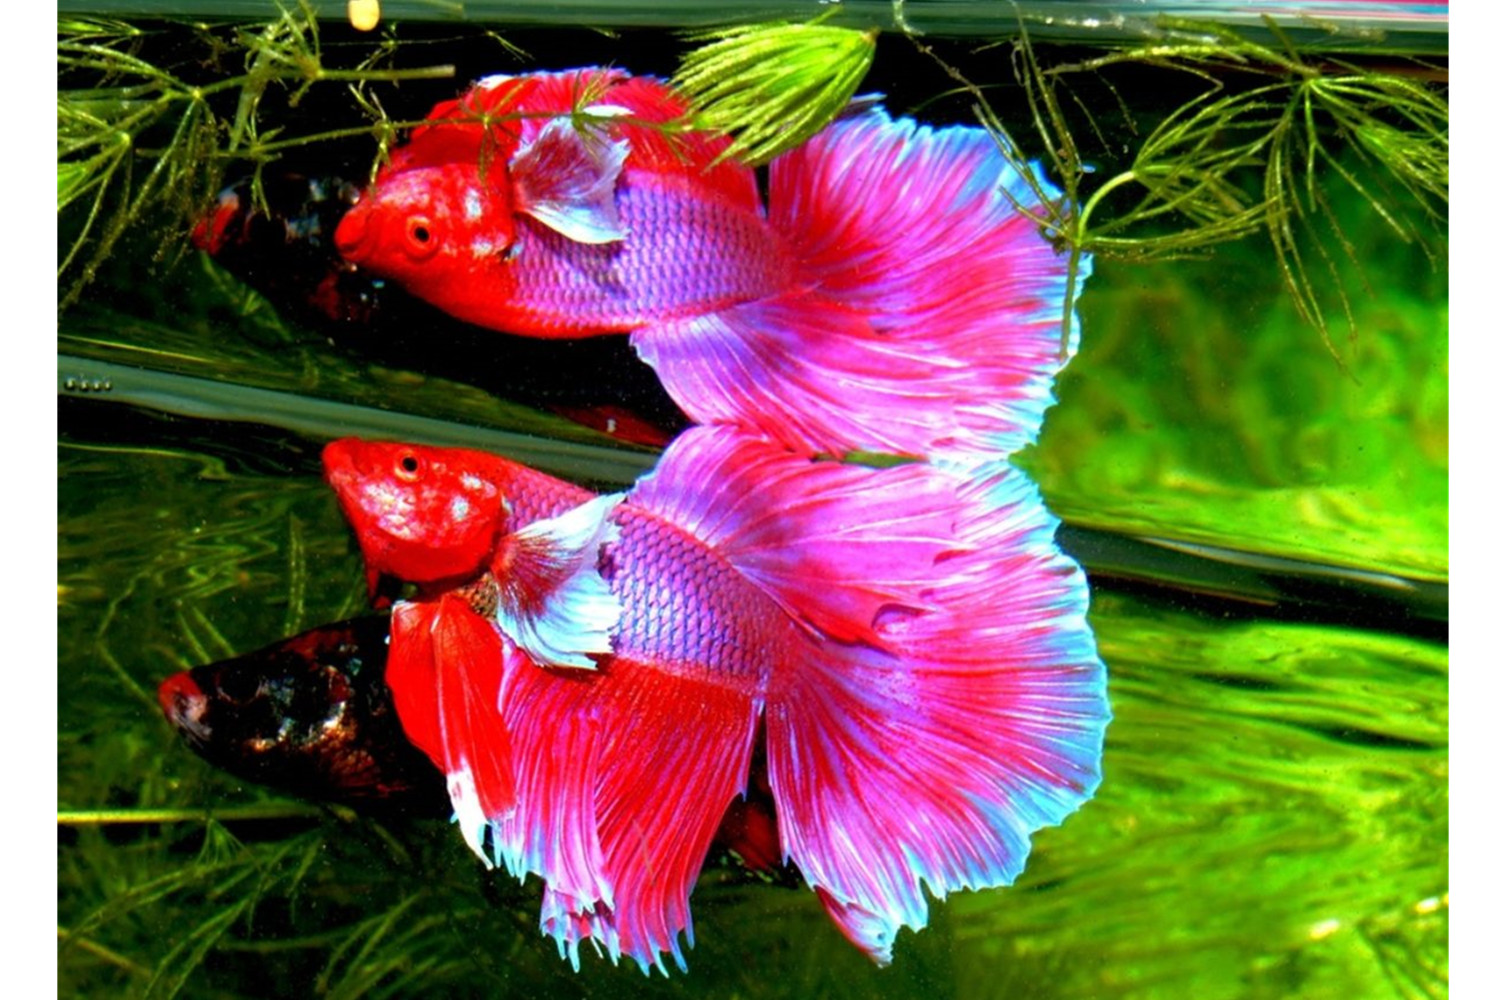 ﻿Fun Facts About Betta Fish